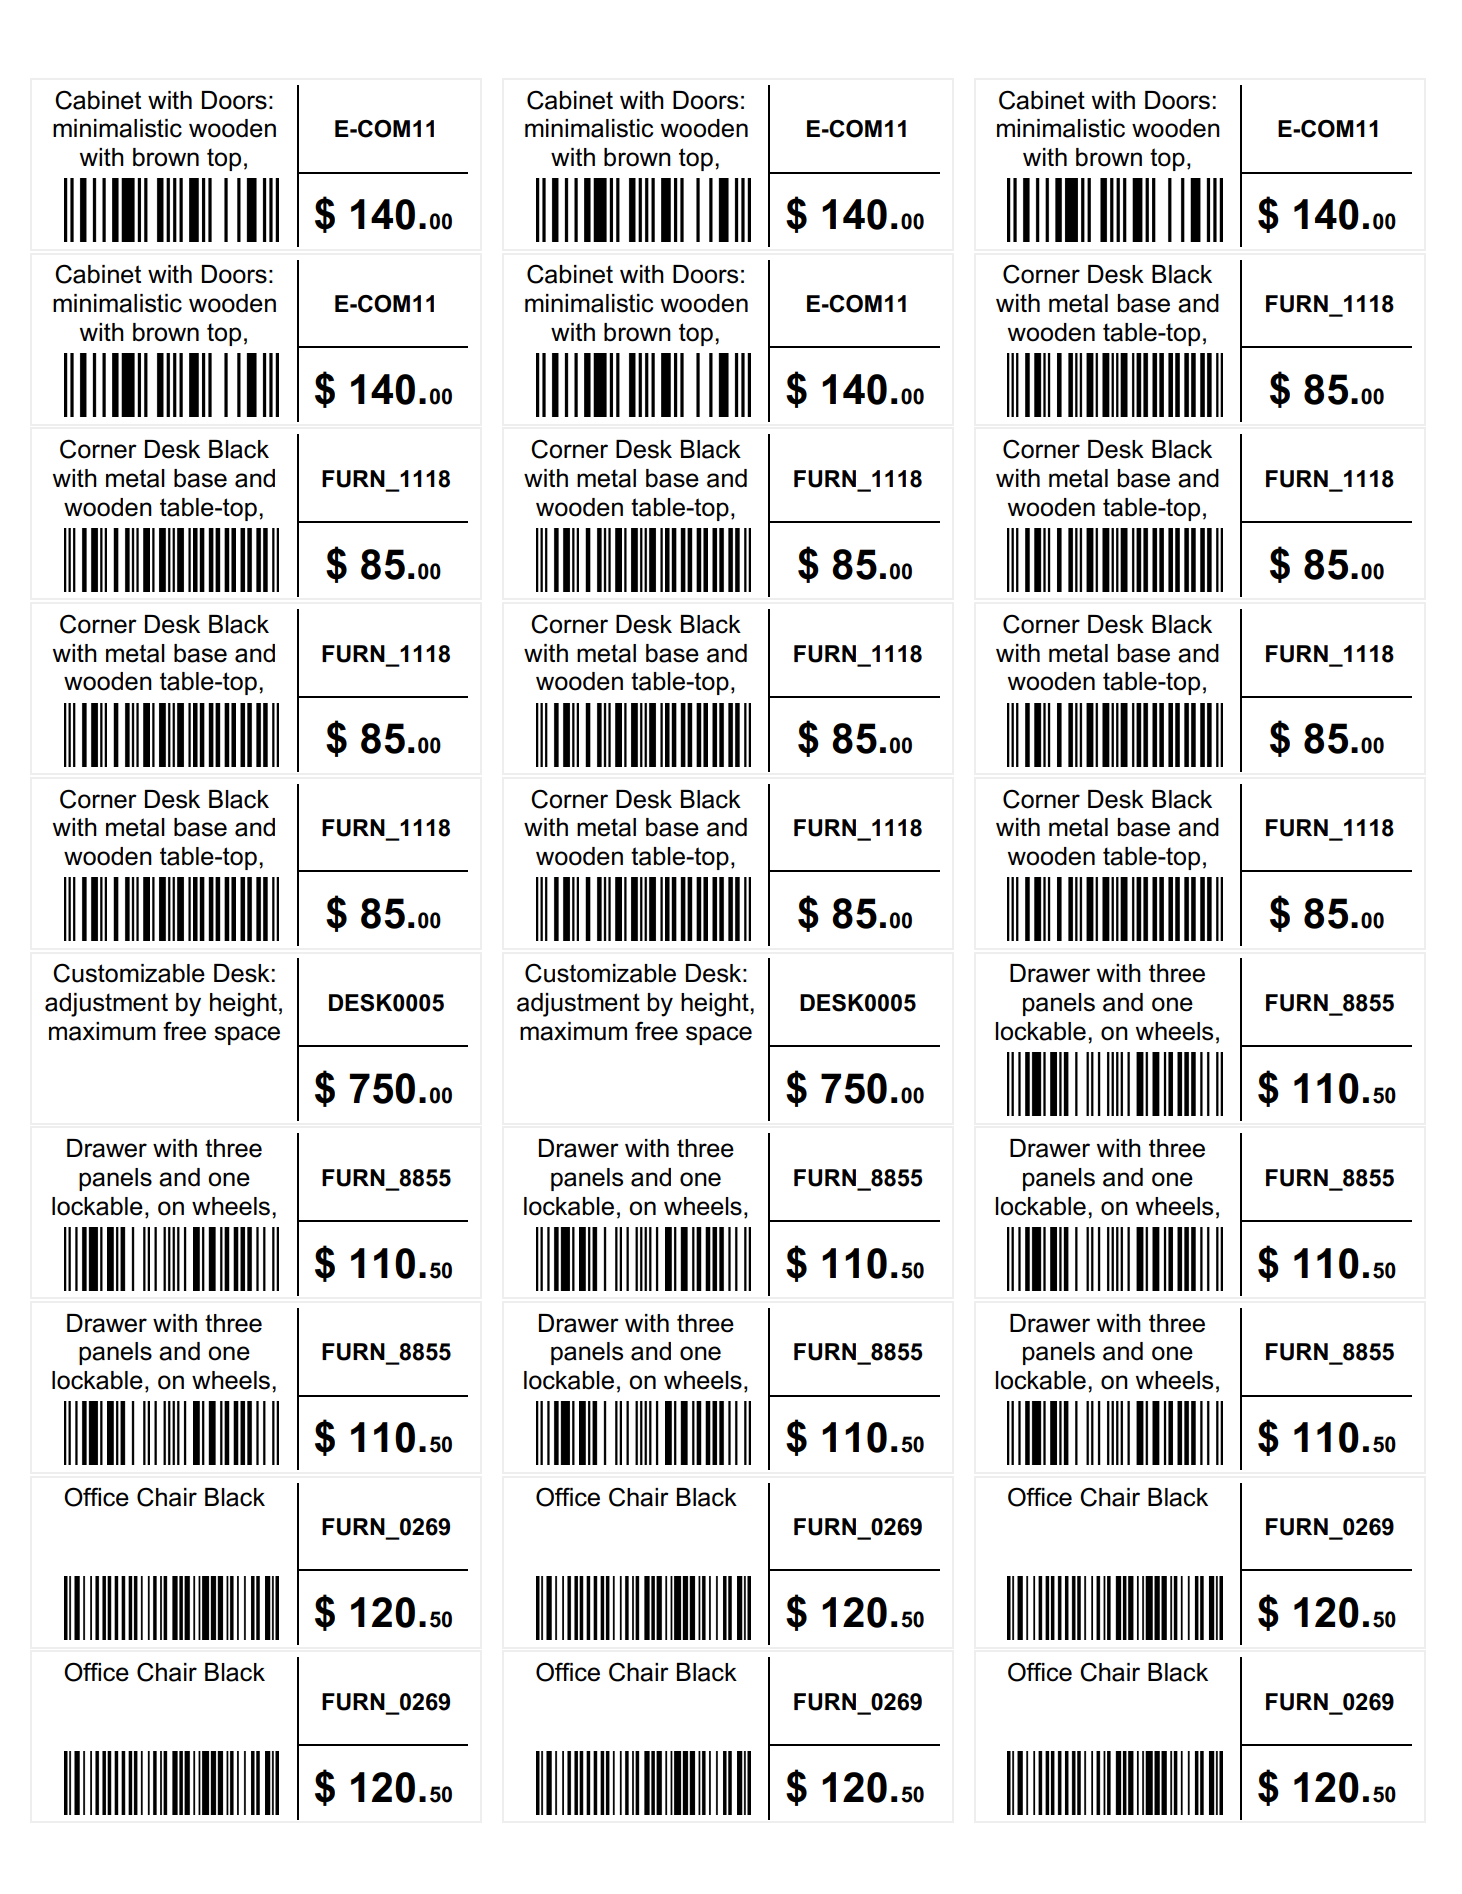 Odoo 16.0 us letter barcode product label 66 x 25 mm